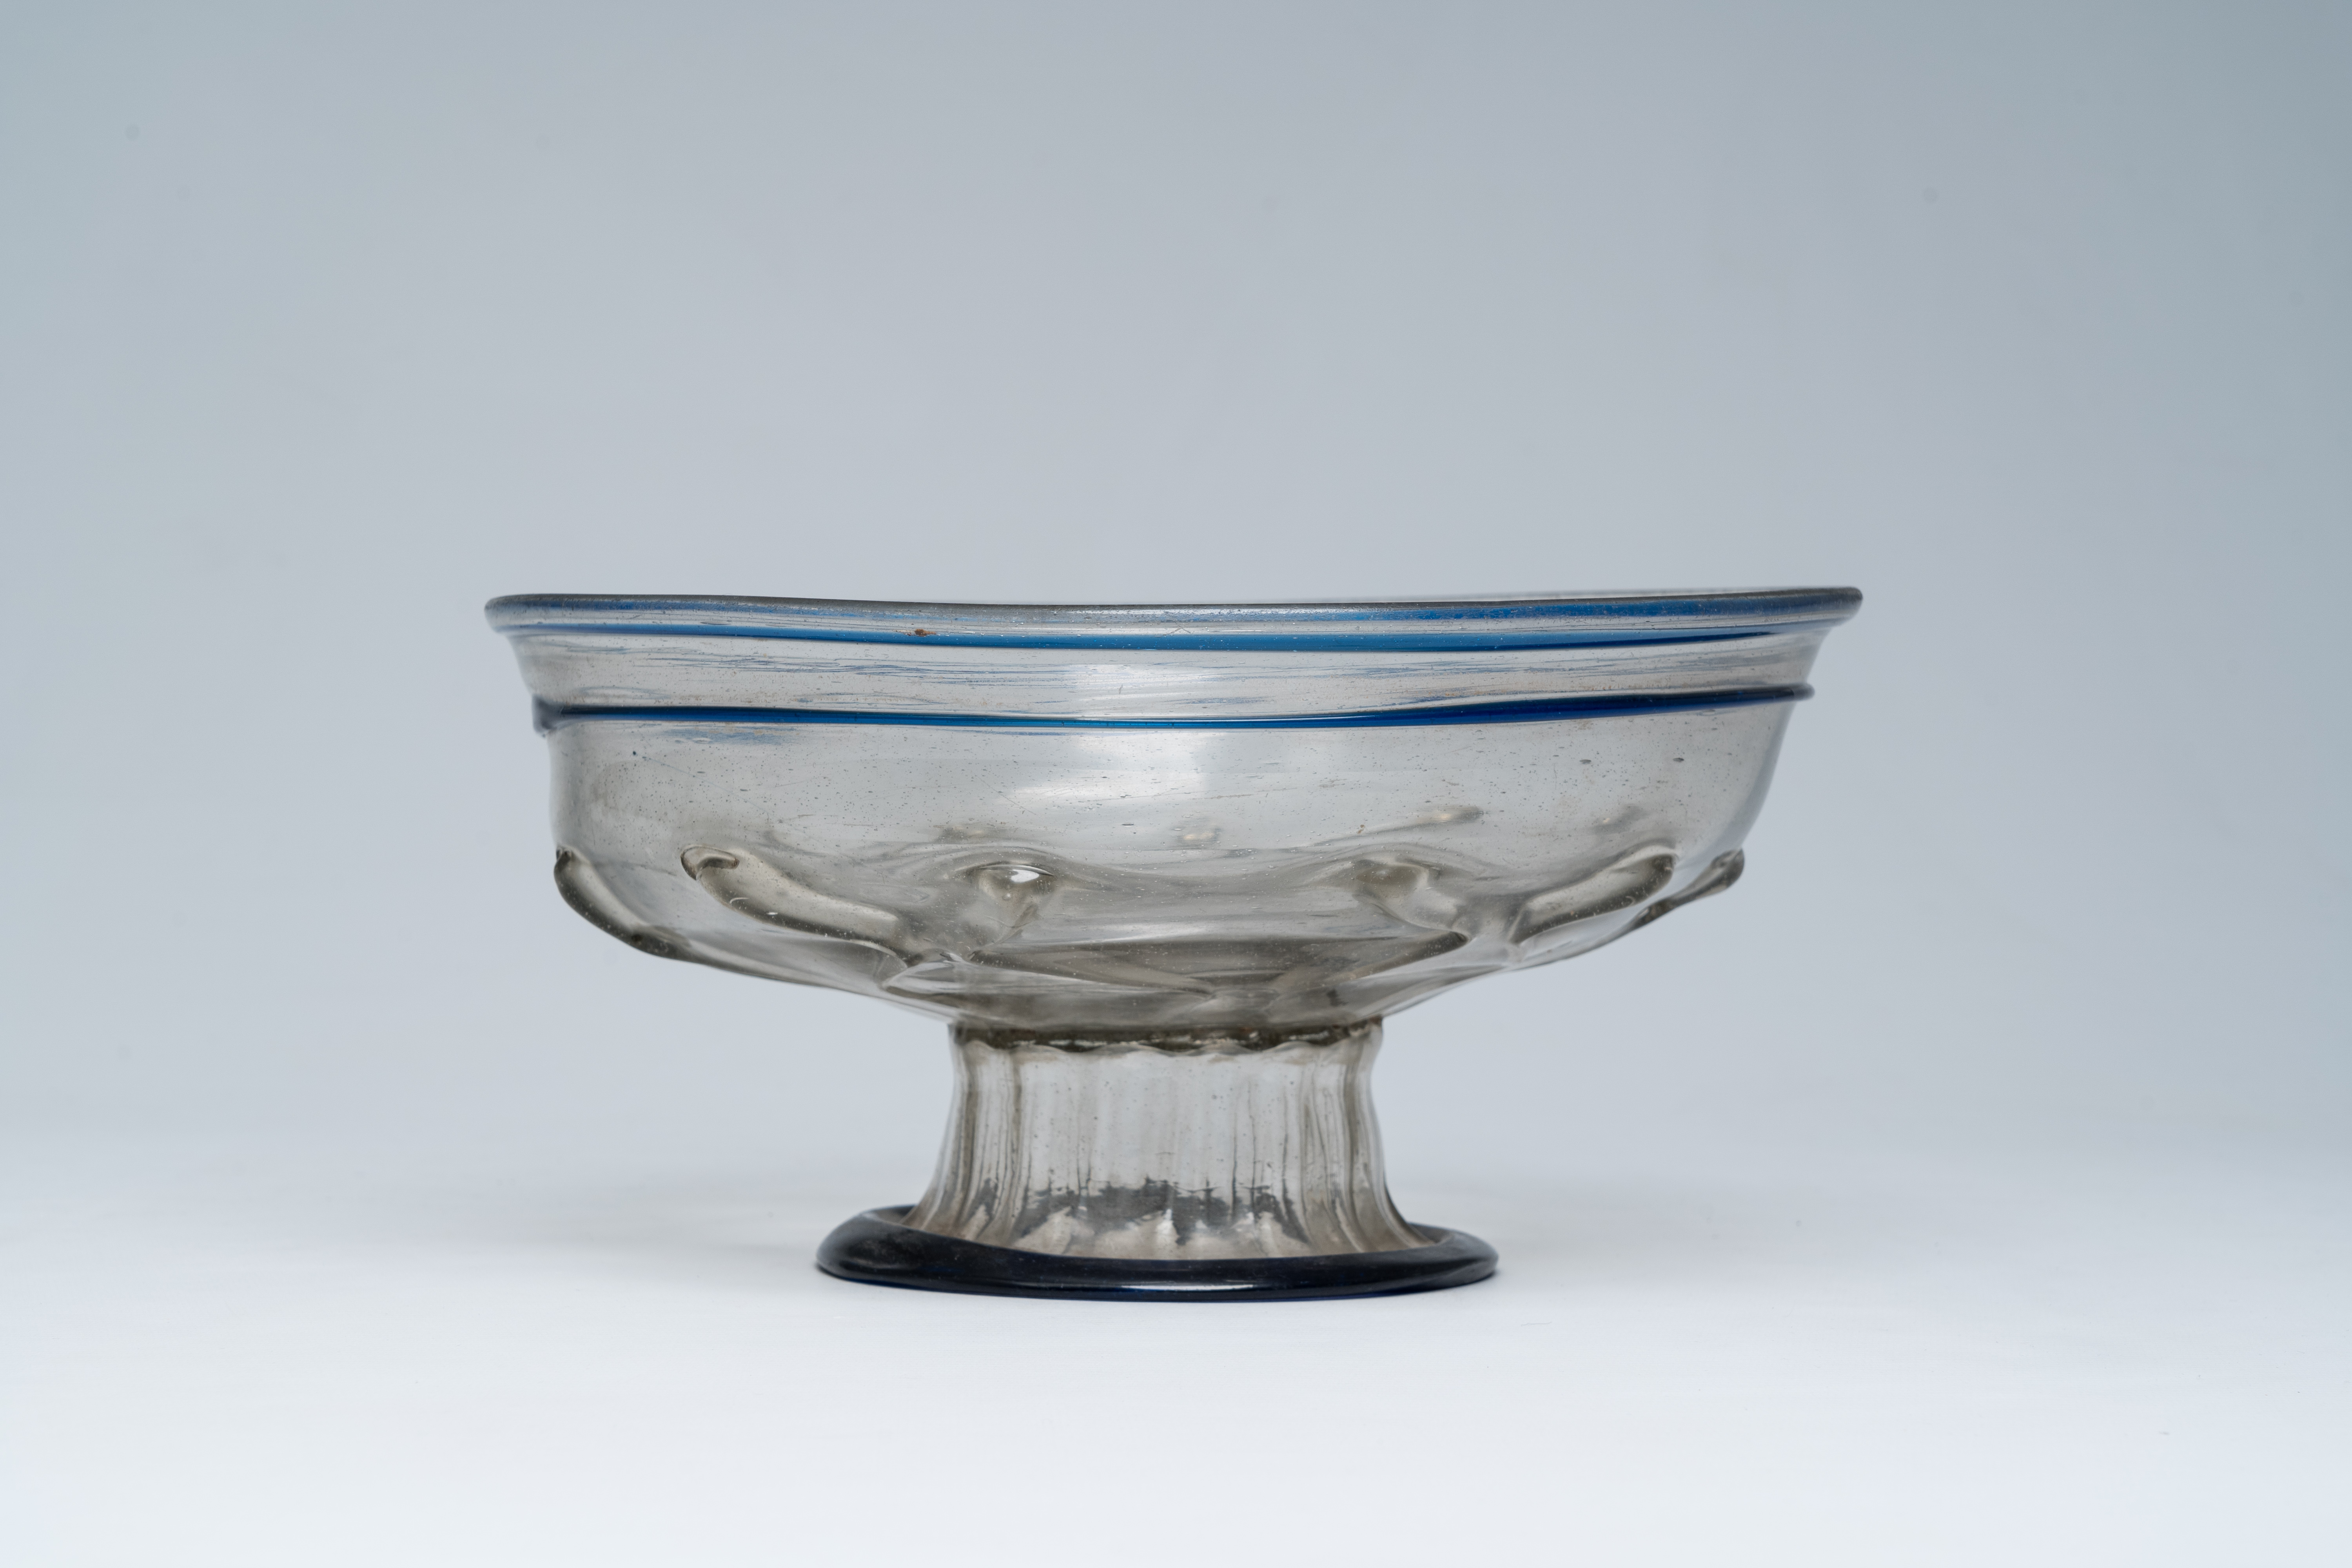 An Italian Renaissance bowl on foot in multicoloured glass, Venice, mid 16th C. - Image 2 of 7